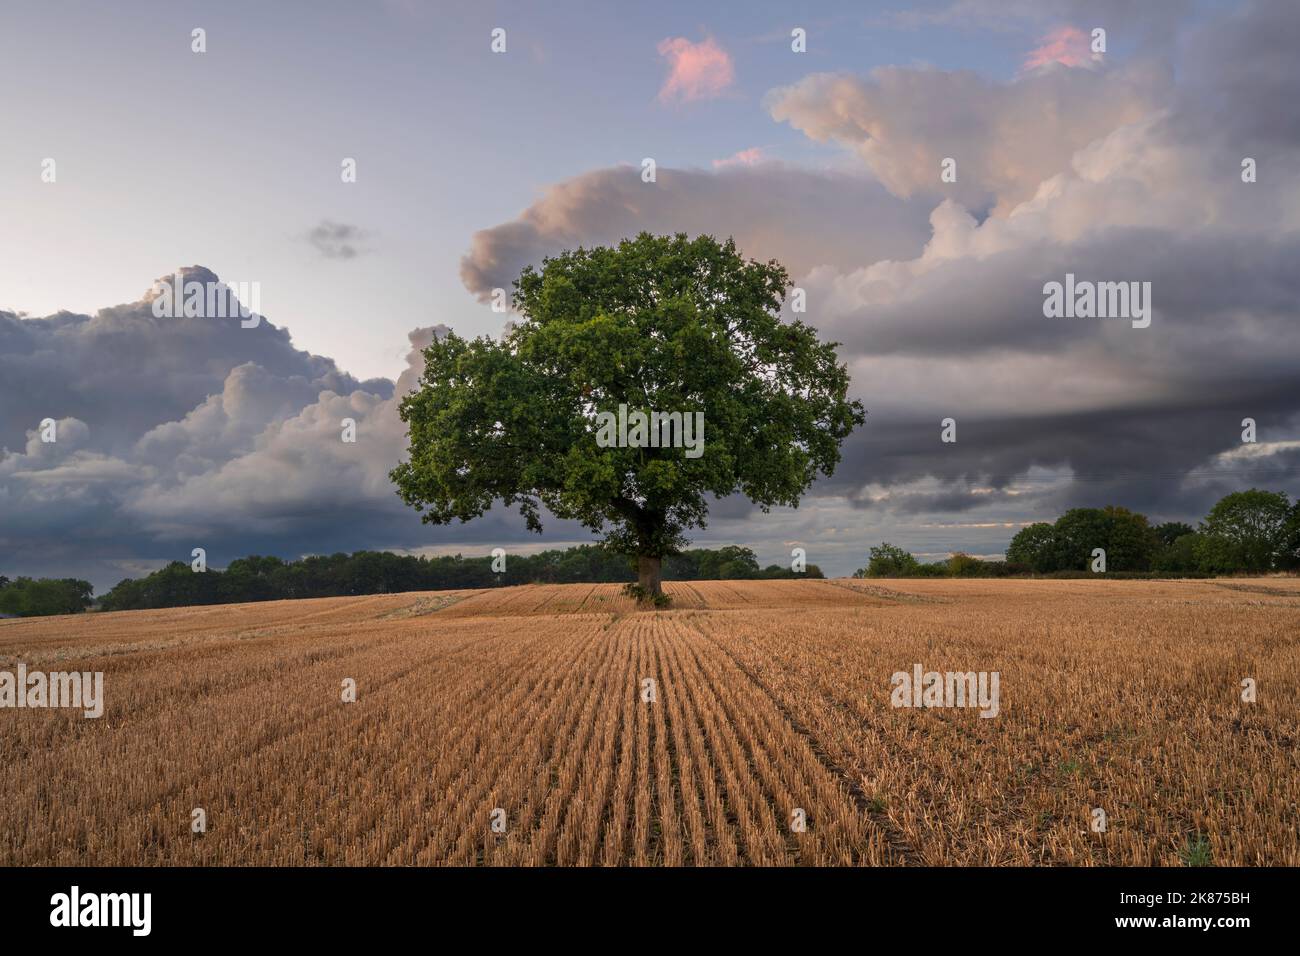 Lone tree in ploughed field with dramatic sky, Congleton, Cheshire, England, United Kingdom, Europe Stock Photo